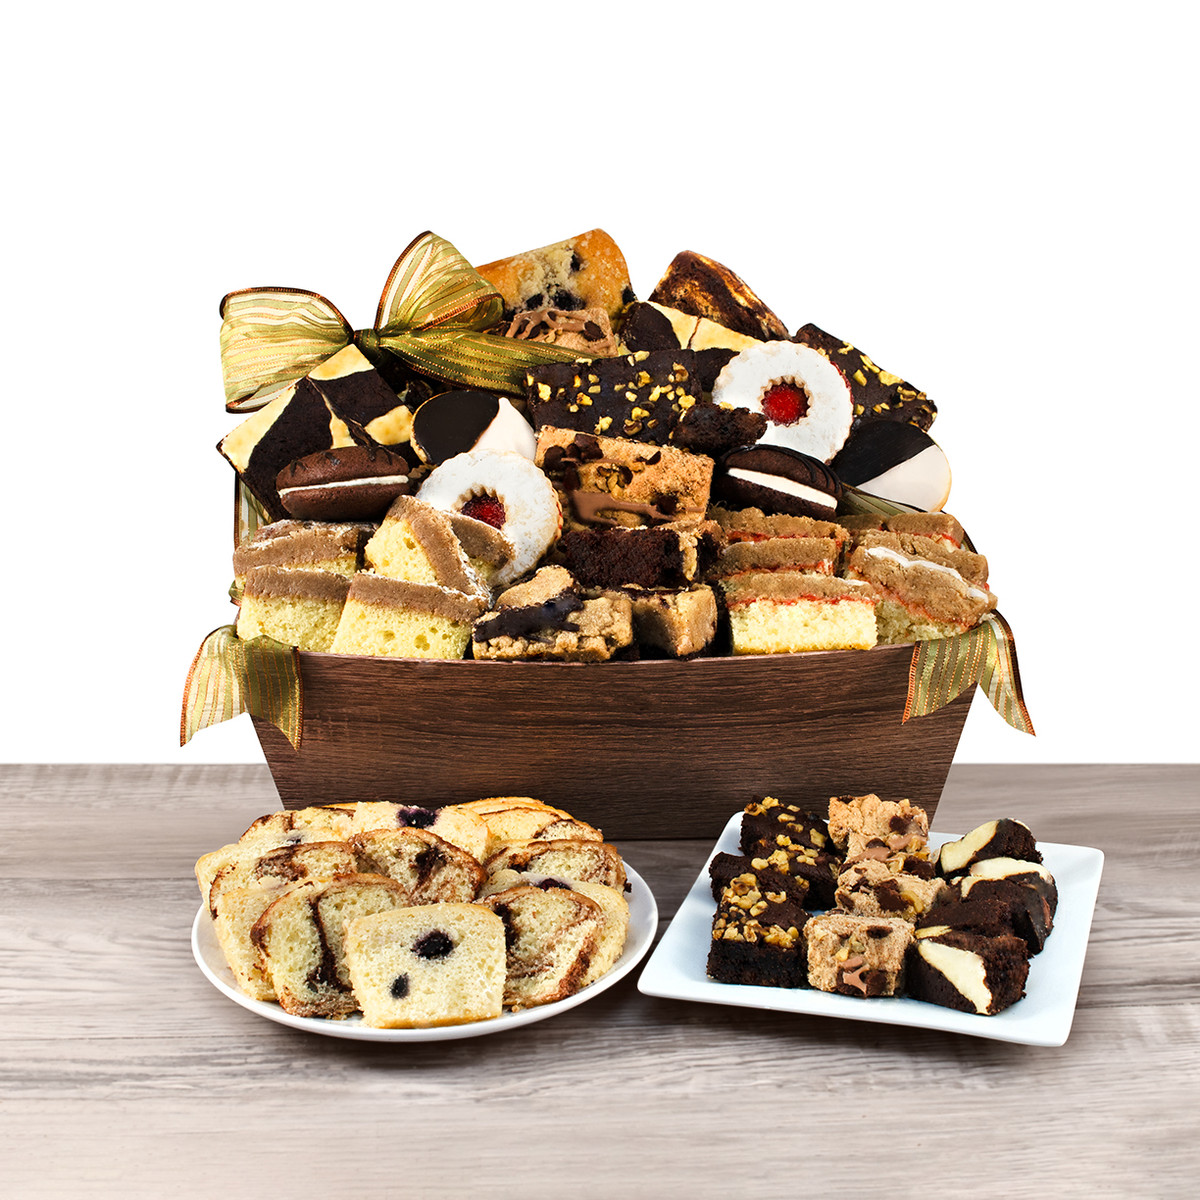 Irresistible Bakery Basket - What a great gift to send! Find this basket and so much more by clicking the link below. #giftbasket #giftbaskets #onlineshopping #greatgiftidea #greatgift #giftidea 
🔗dpbolvw.net/click-10093009…